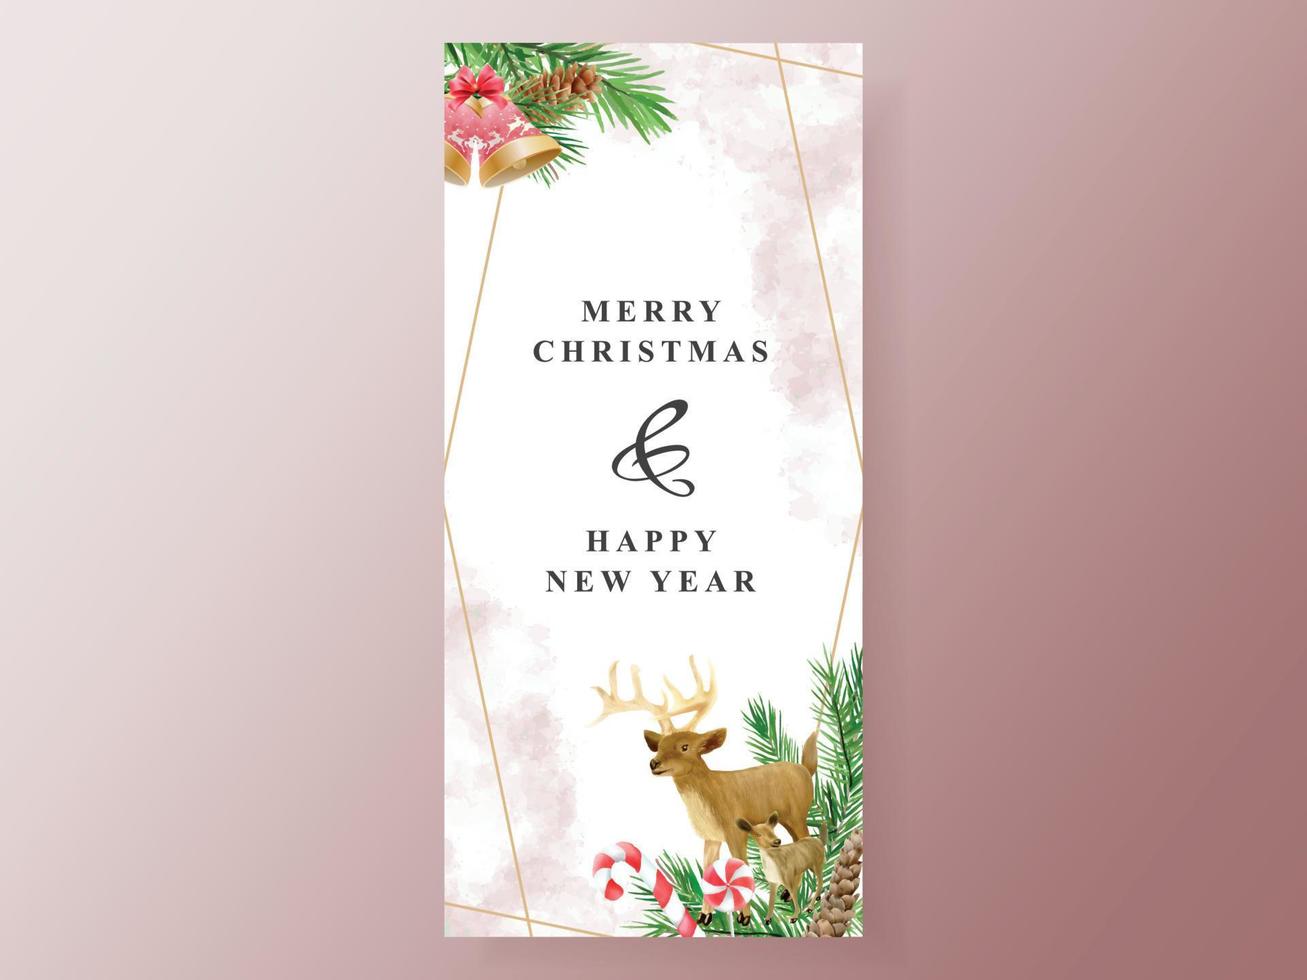 postcard with illustration of animal and christmas element vector